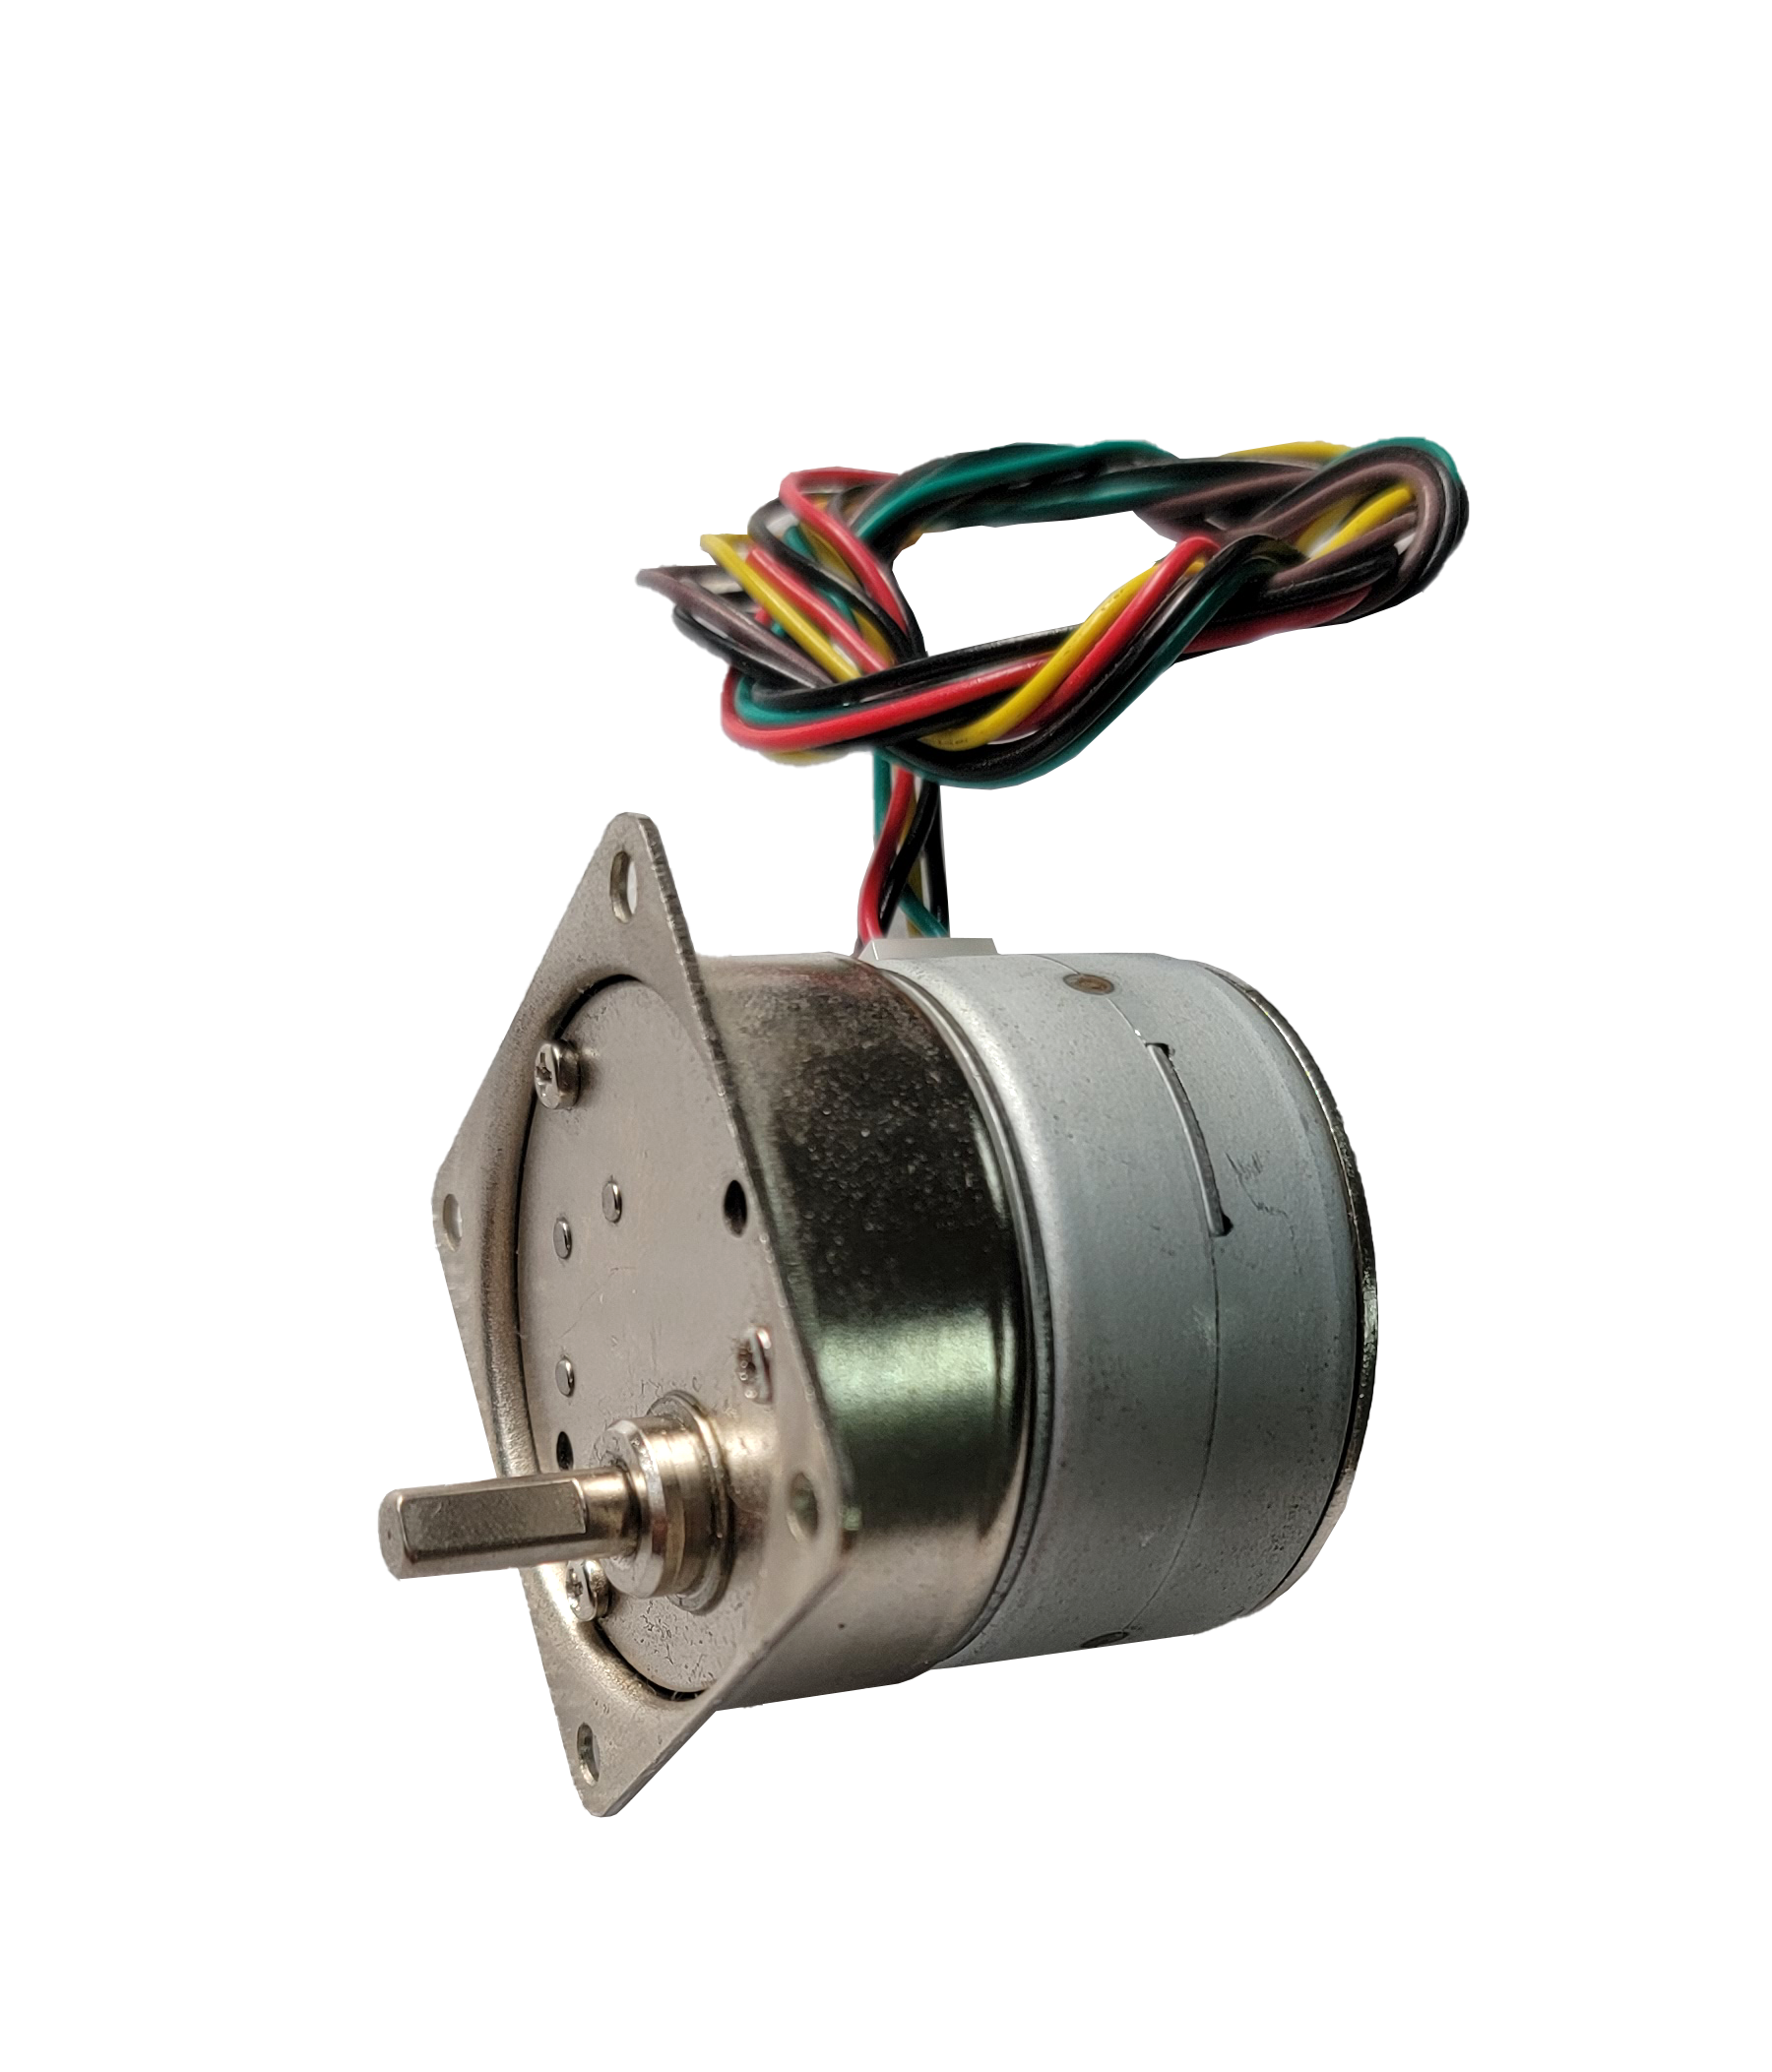 Ac Spindle Motor Supplier –  7.5 ° geared stepper motor from Shenzhen manufacturer with quality price & service – Bobet